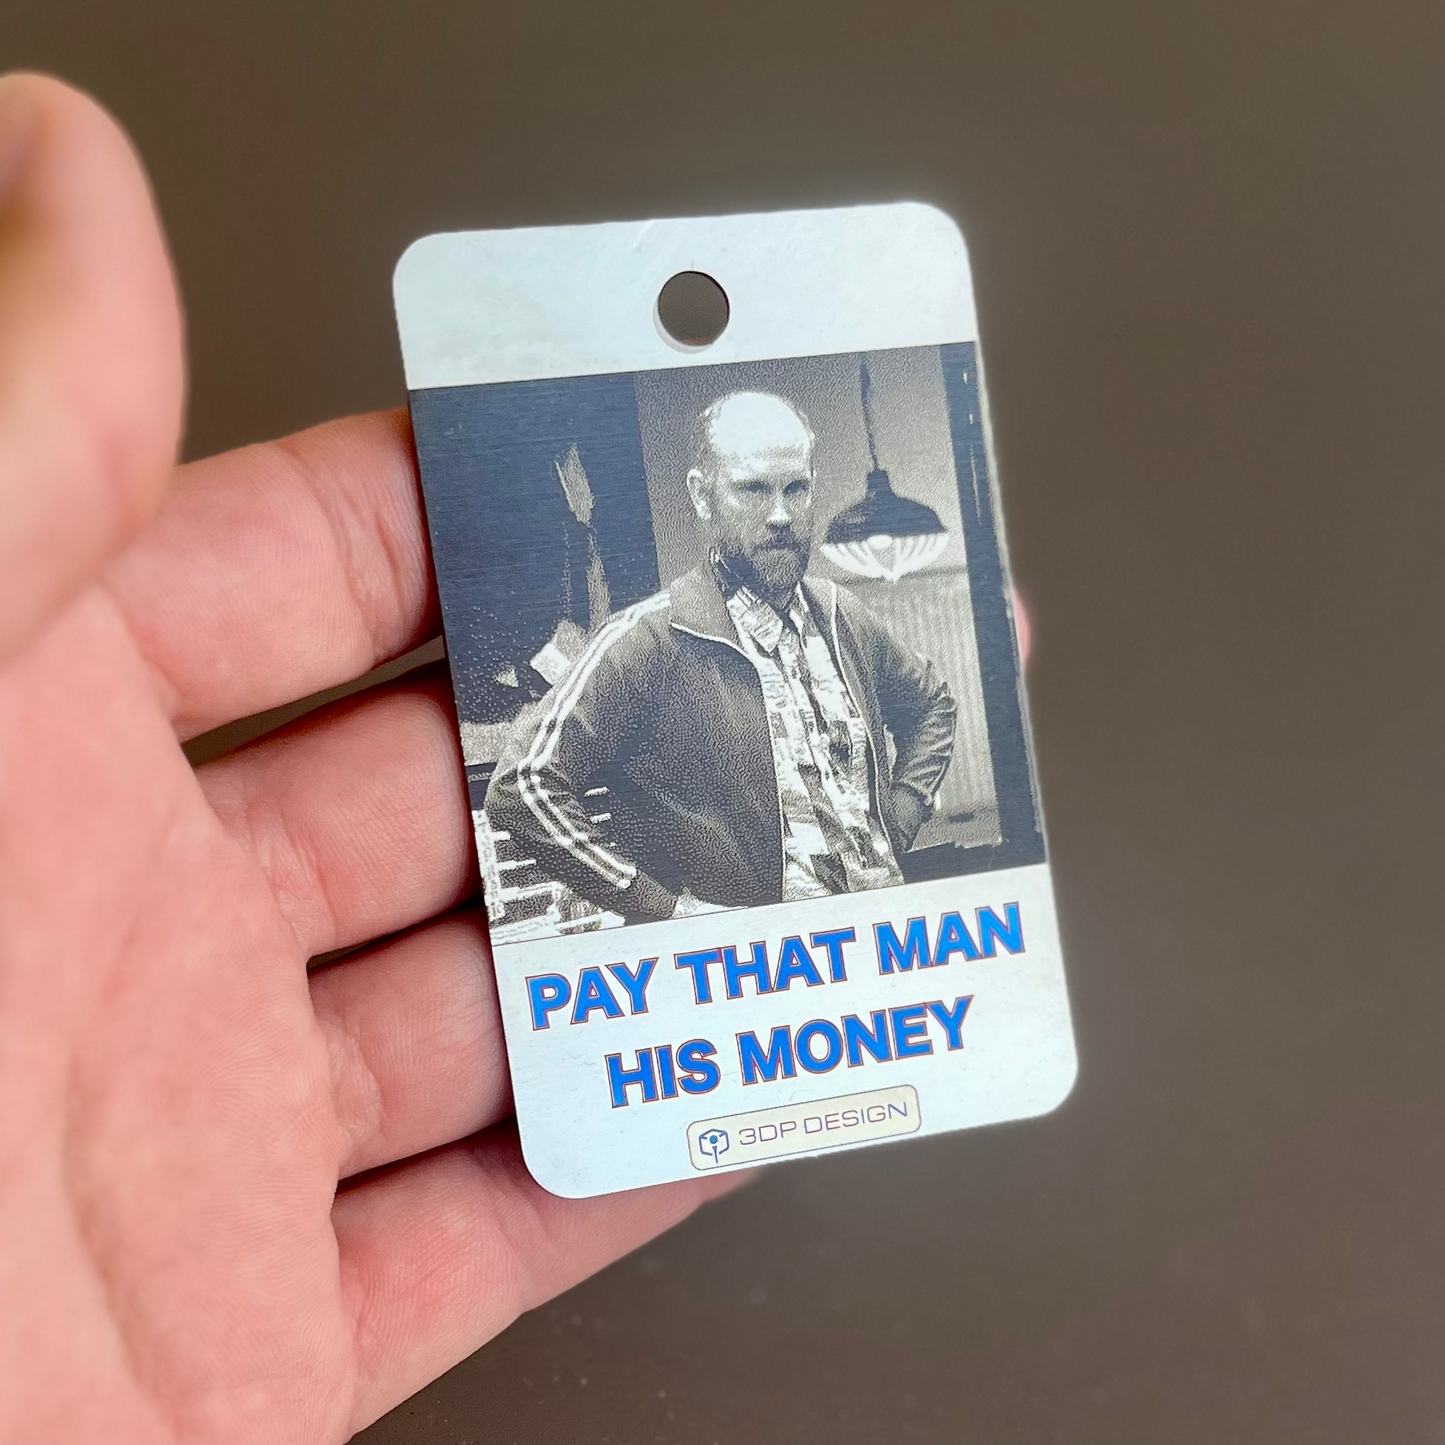 Ben Franklin "Pay Me" Personalized Bag Tags